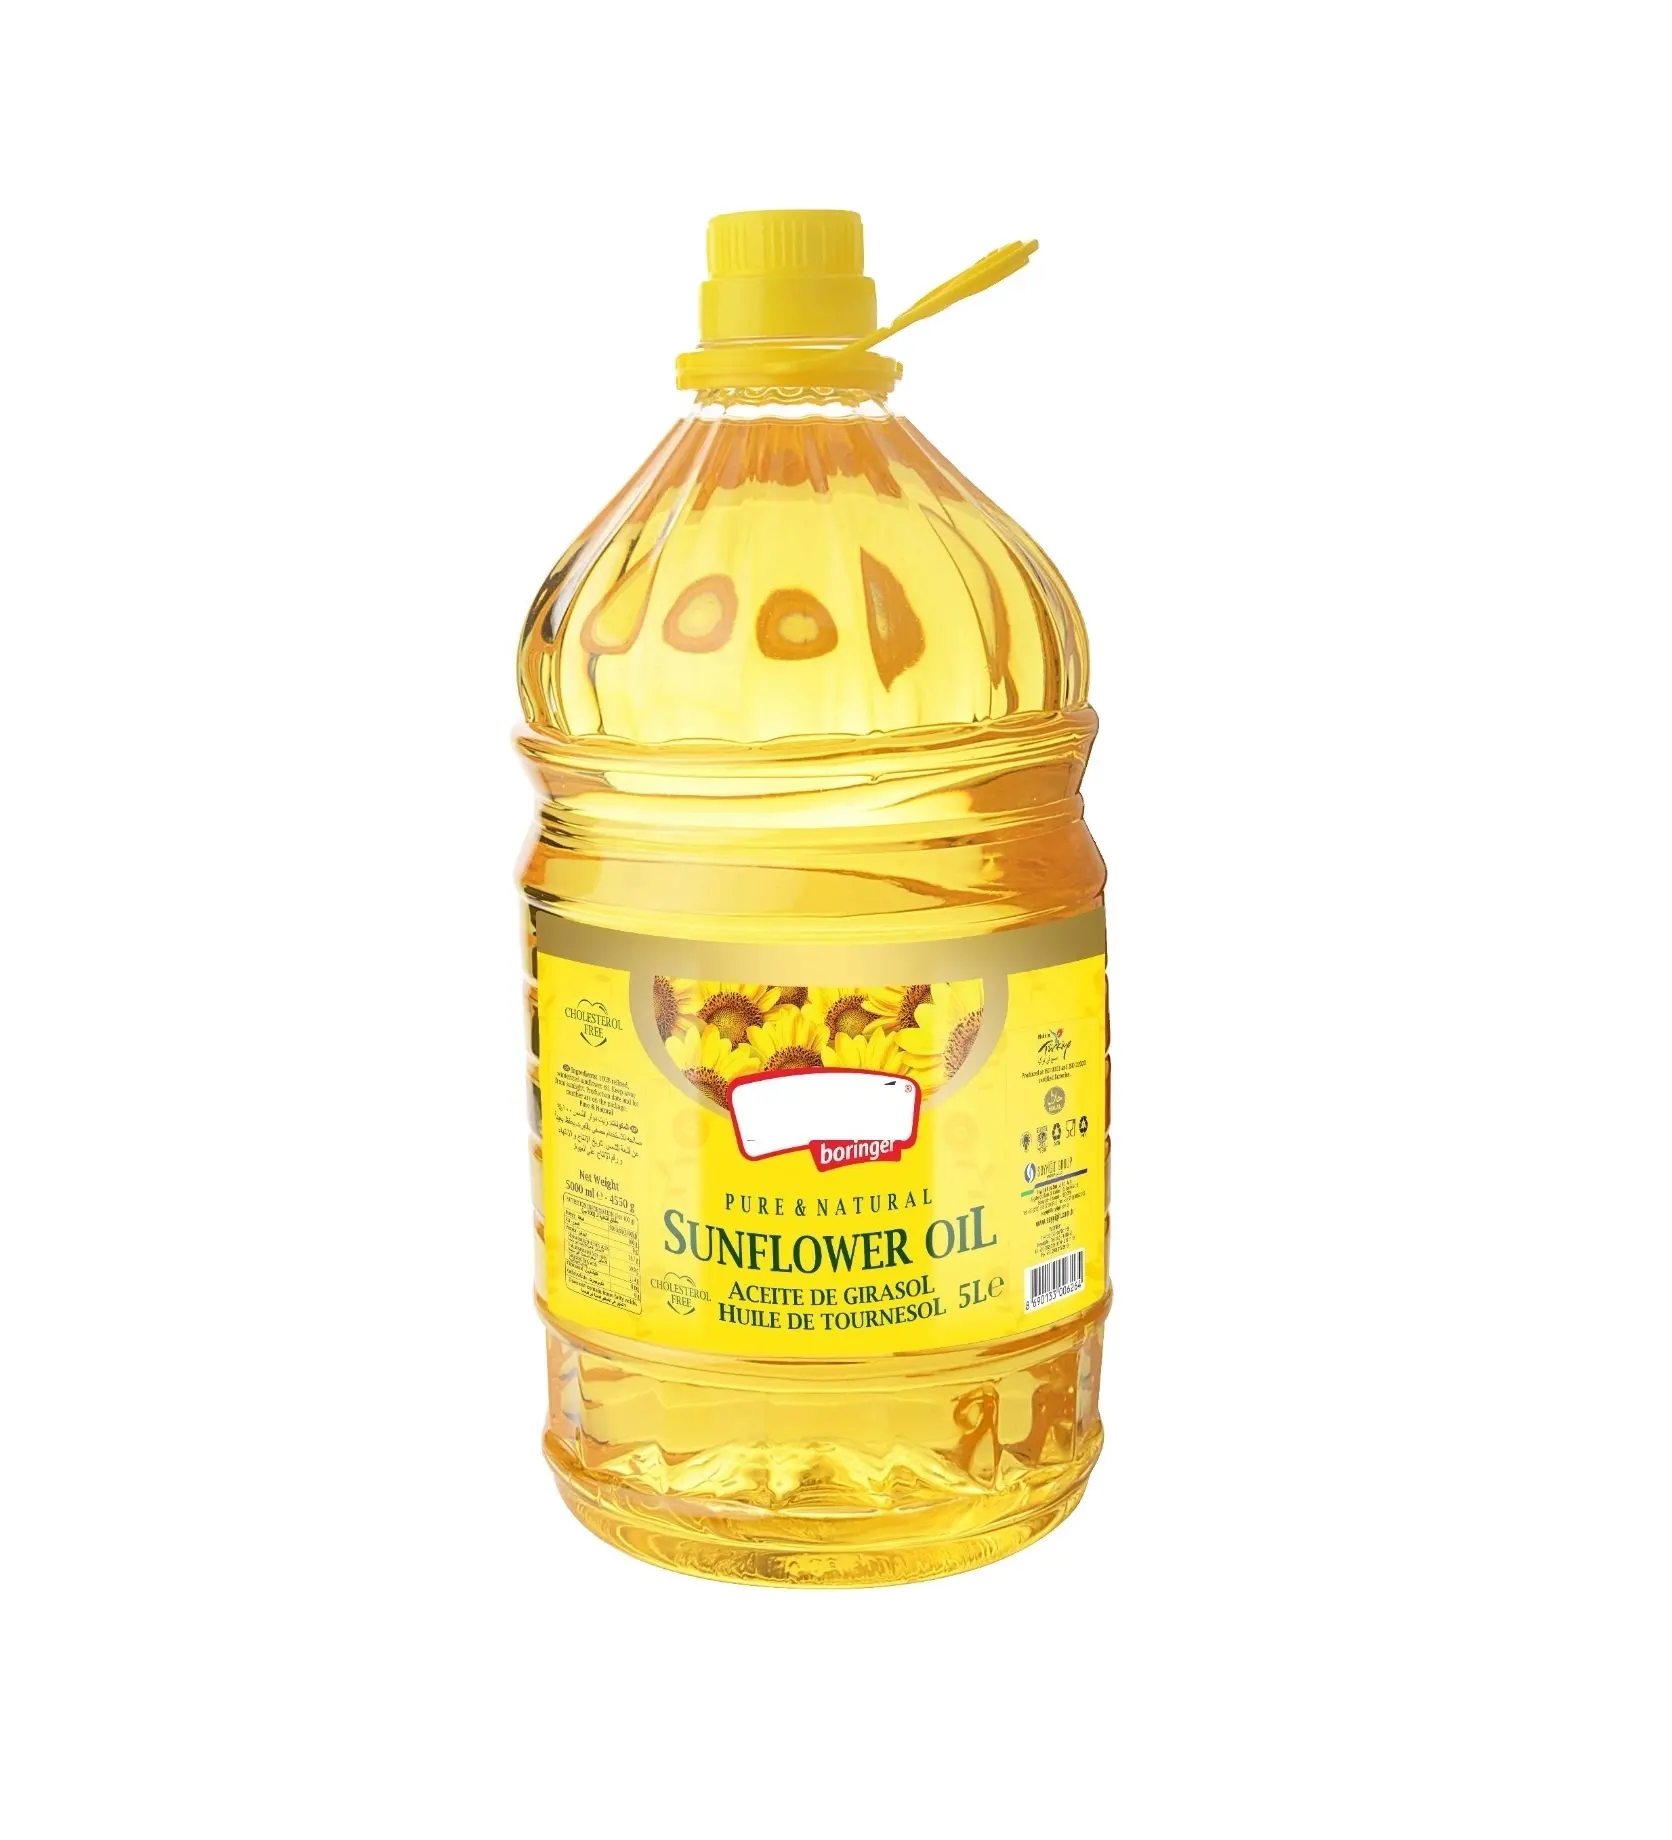 REFINED SUNFLOWER OIL HIGH-QUALITY TURKEY WHOLESALE BULK EDIBLE VEGETABLE OIL FOR HUMAN CONSUMPTION AGROWELL TURKISH GOODS